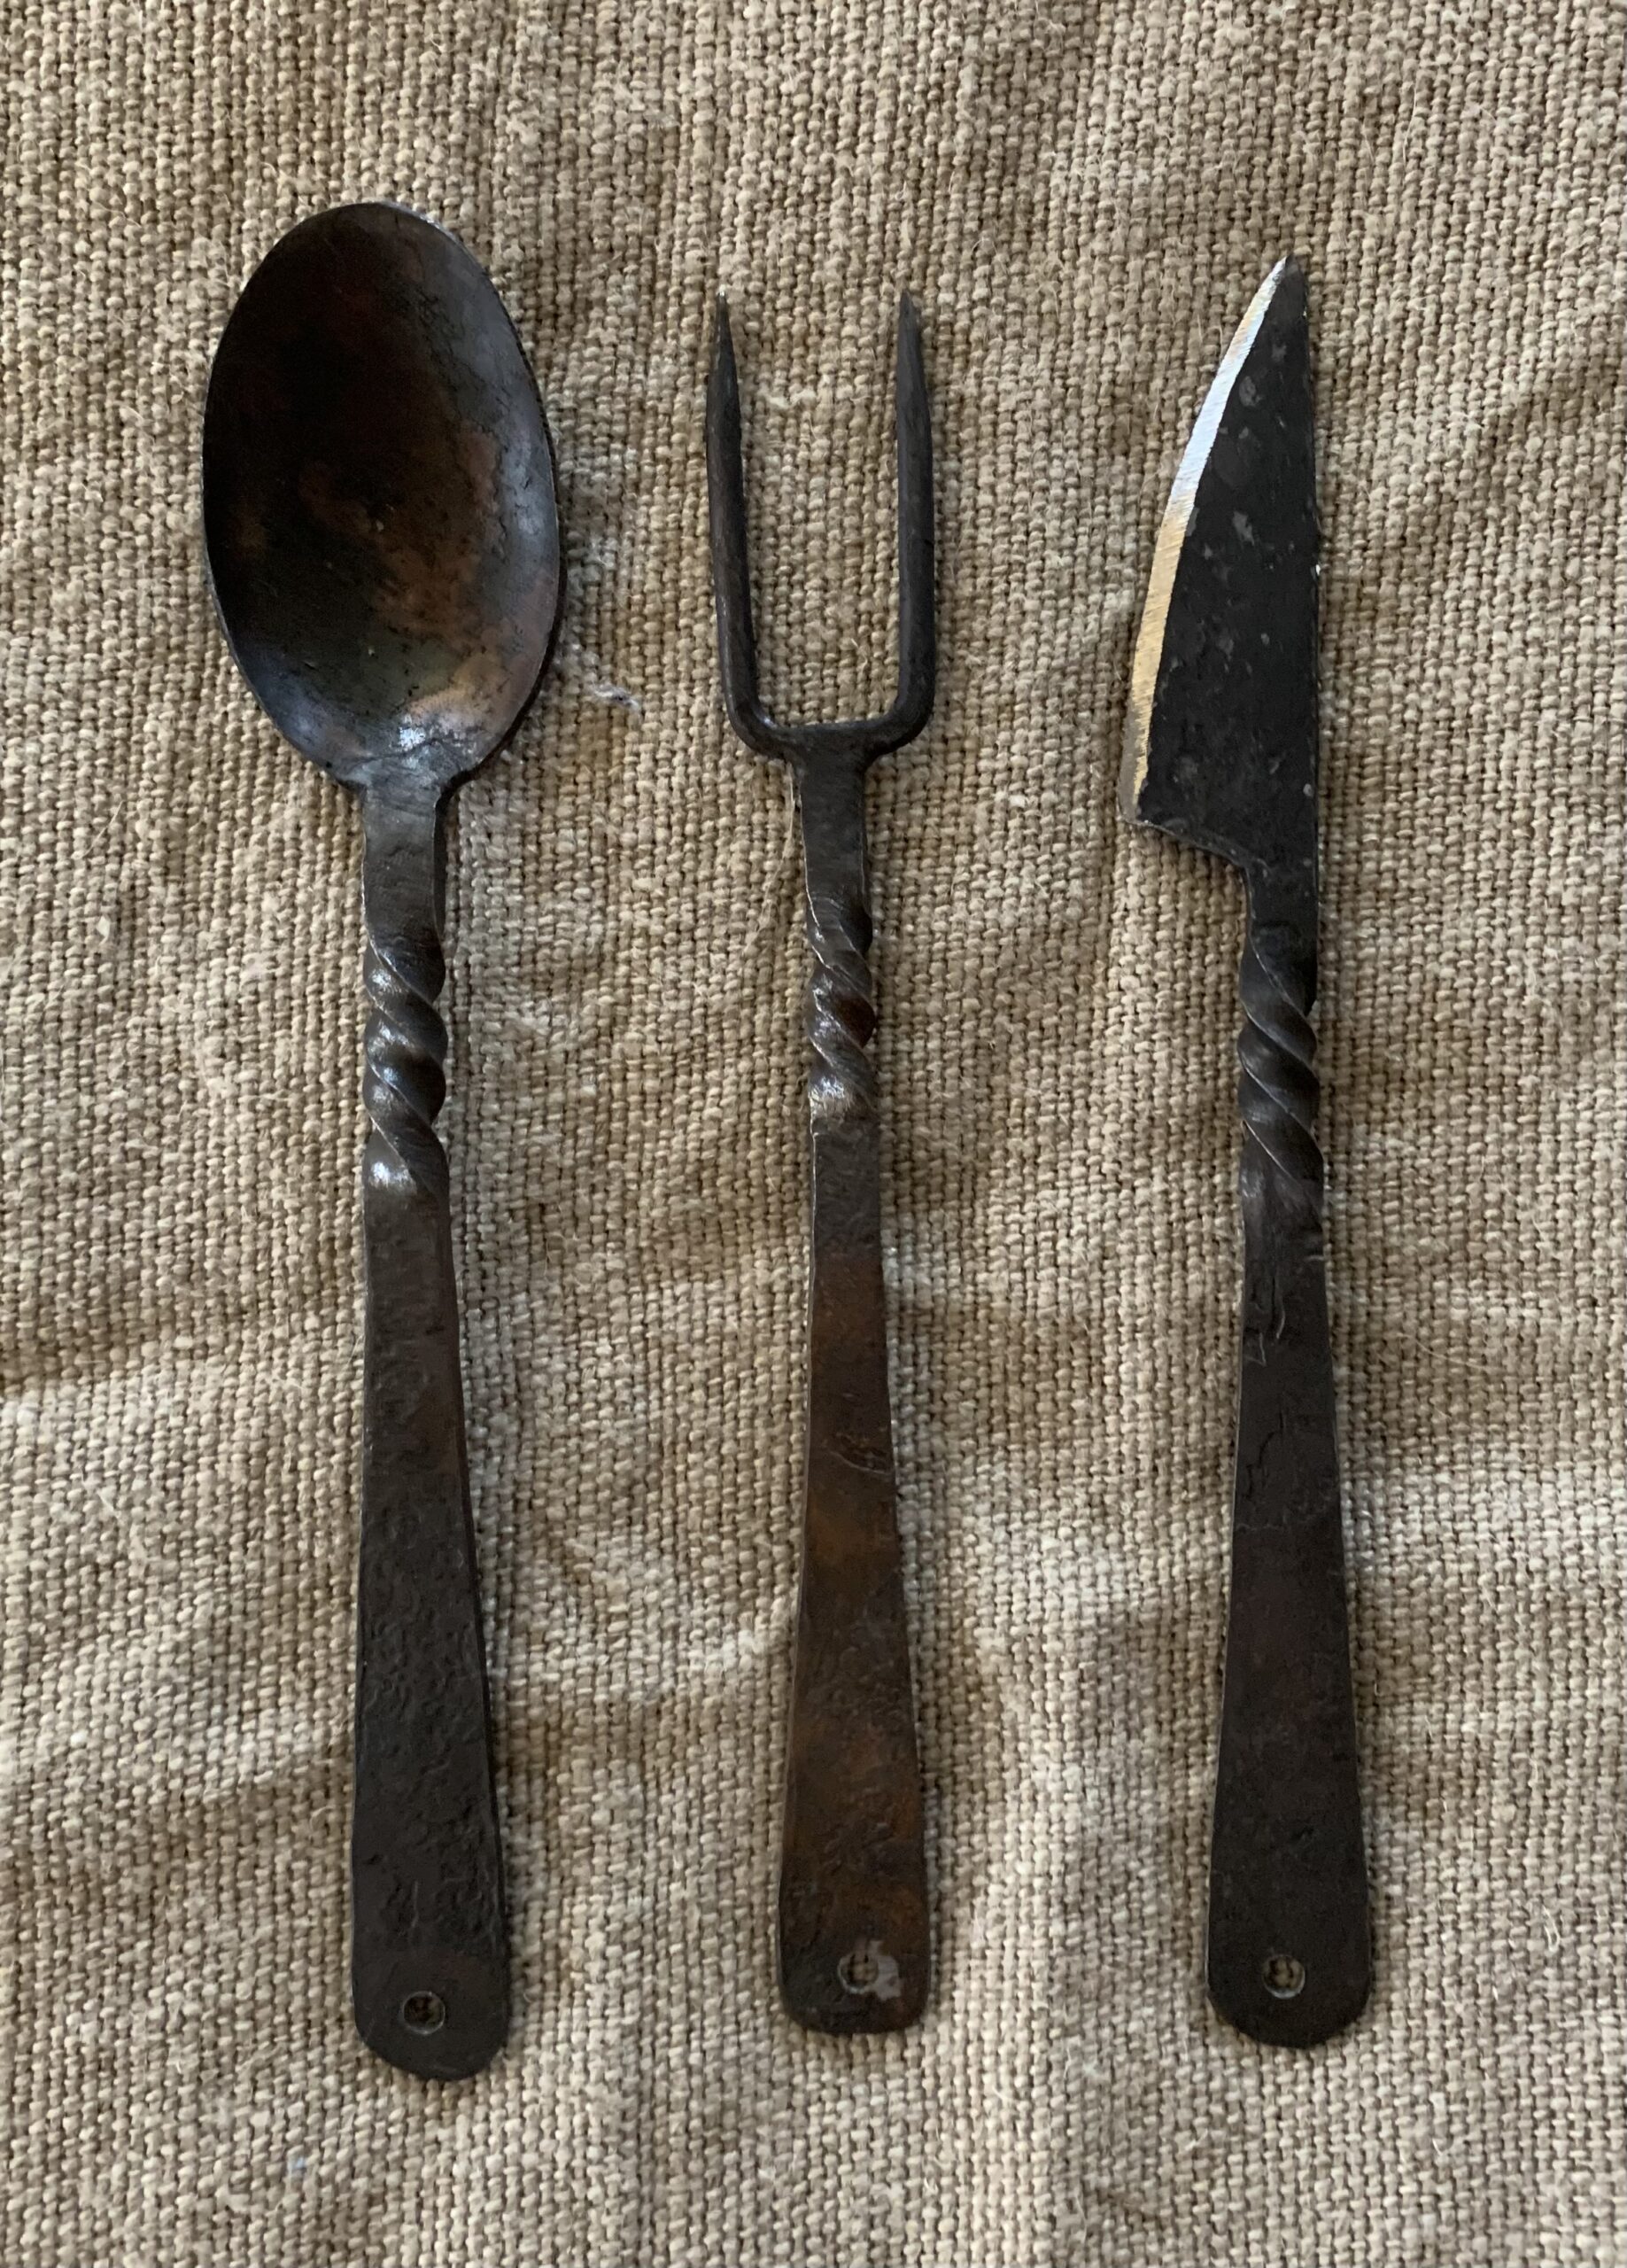 Revolutionary Period Hand-Forged Eating Utensils (item #862886)